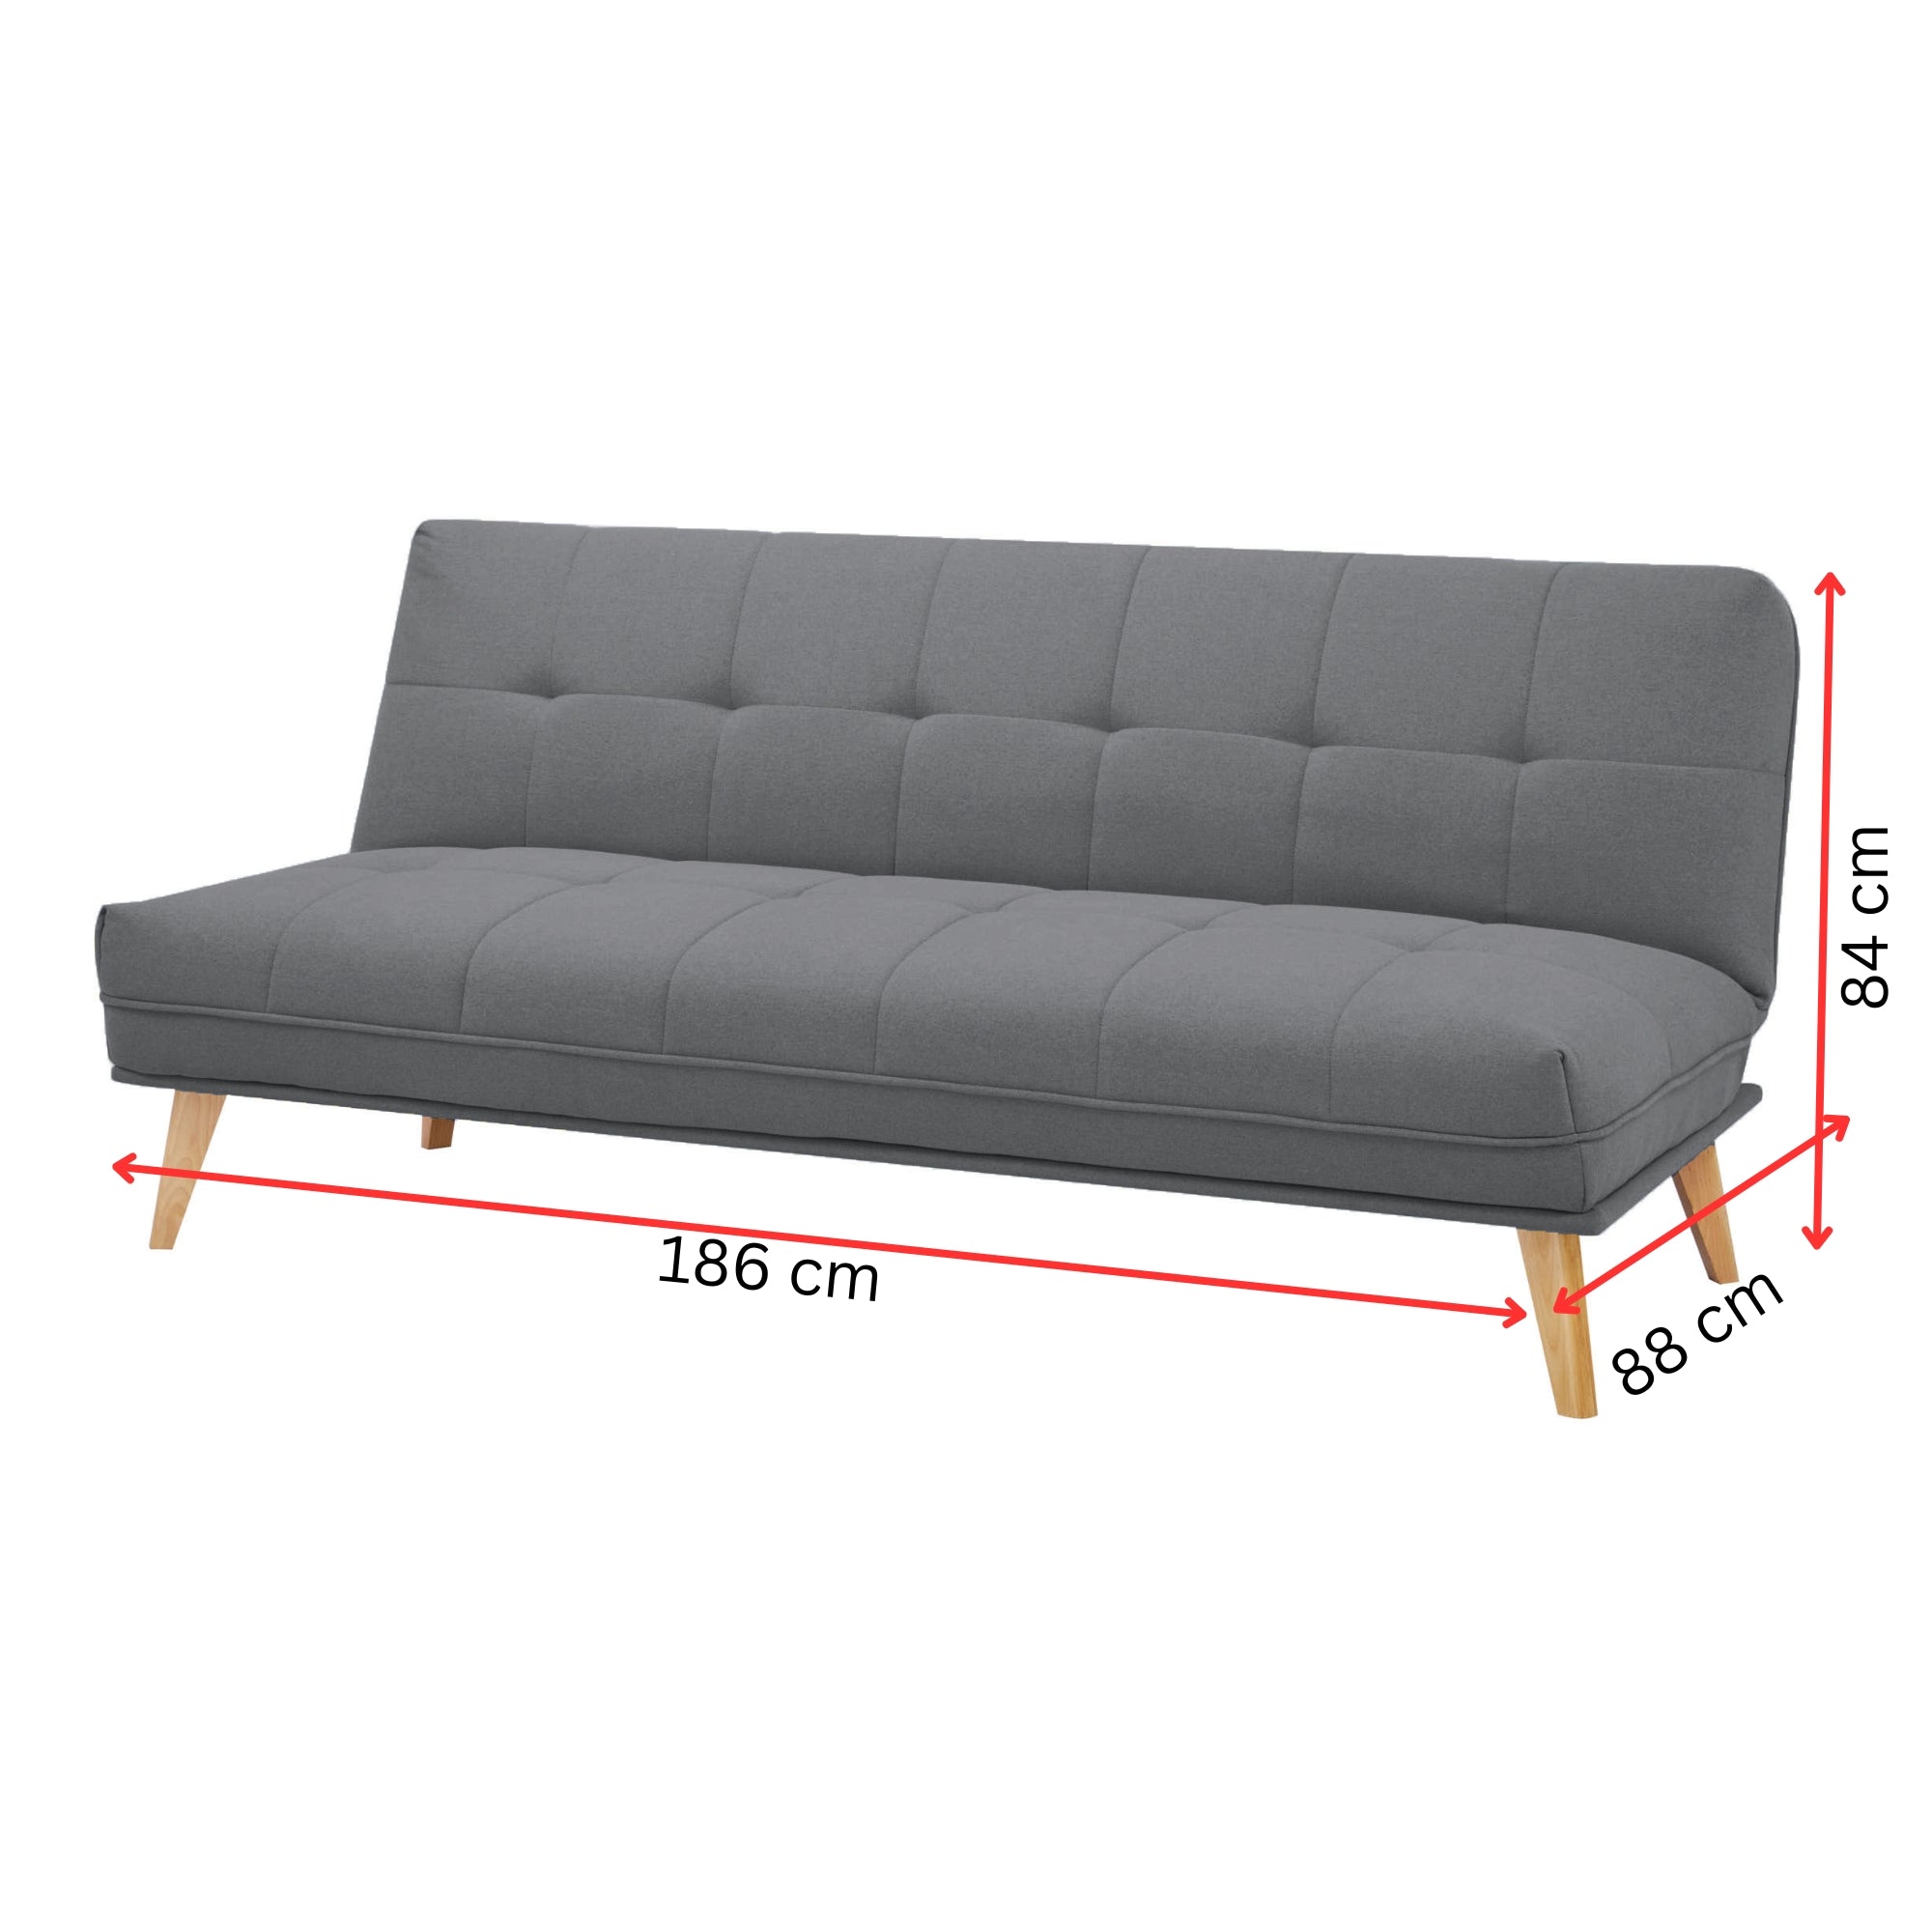 Mid Grey 3-Seater Sofa Bed with Wooden Legs, Scandinavian Style